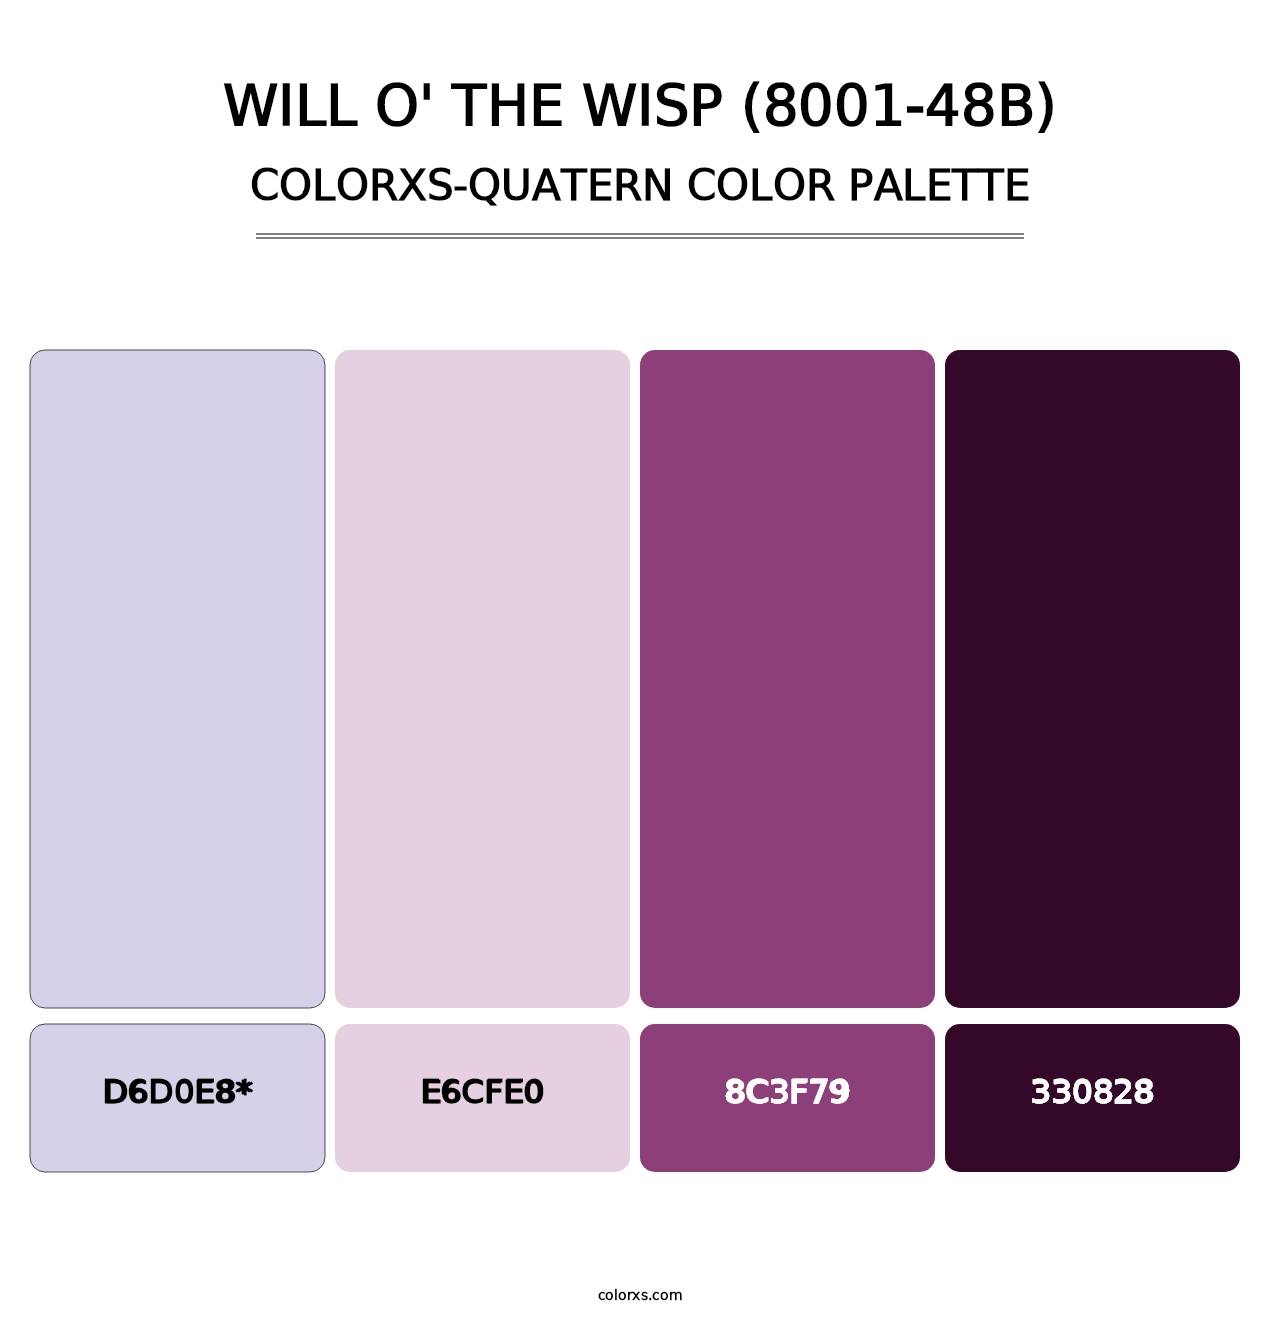 Will o' the Wisp (8001-48B) - Colorxs Quatern Palette